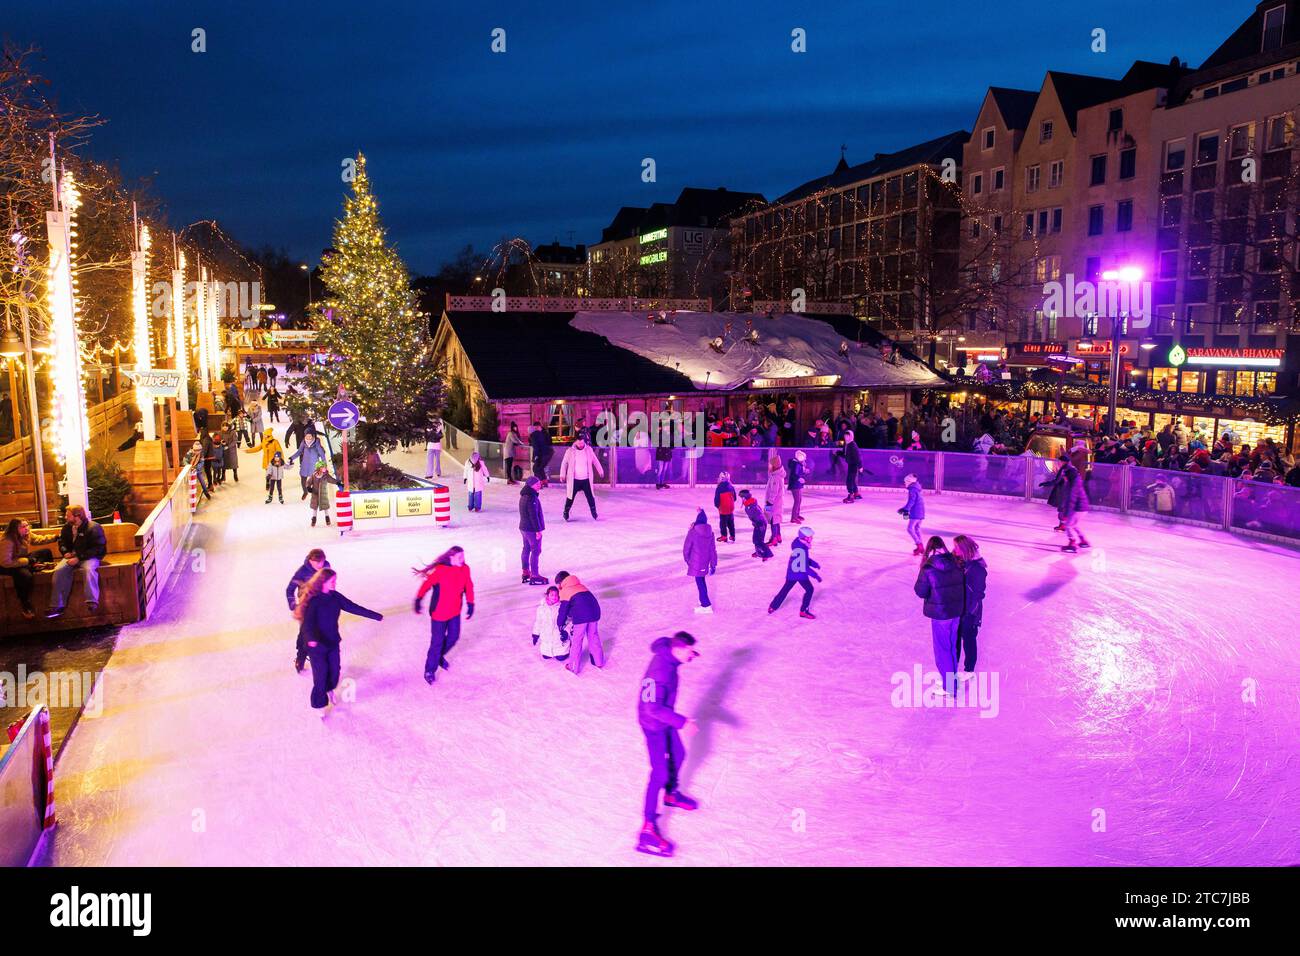 ice skating rink on the Christmas market at the Heumarkt in the historic town, Cologne, Germany. Eislaufbahn auf dem Weihnachtsmarkt am Heumarkt in de Stock Photo